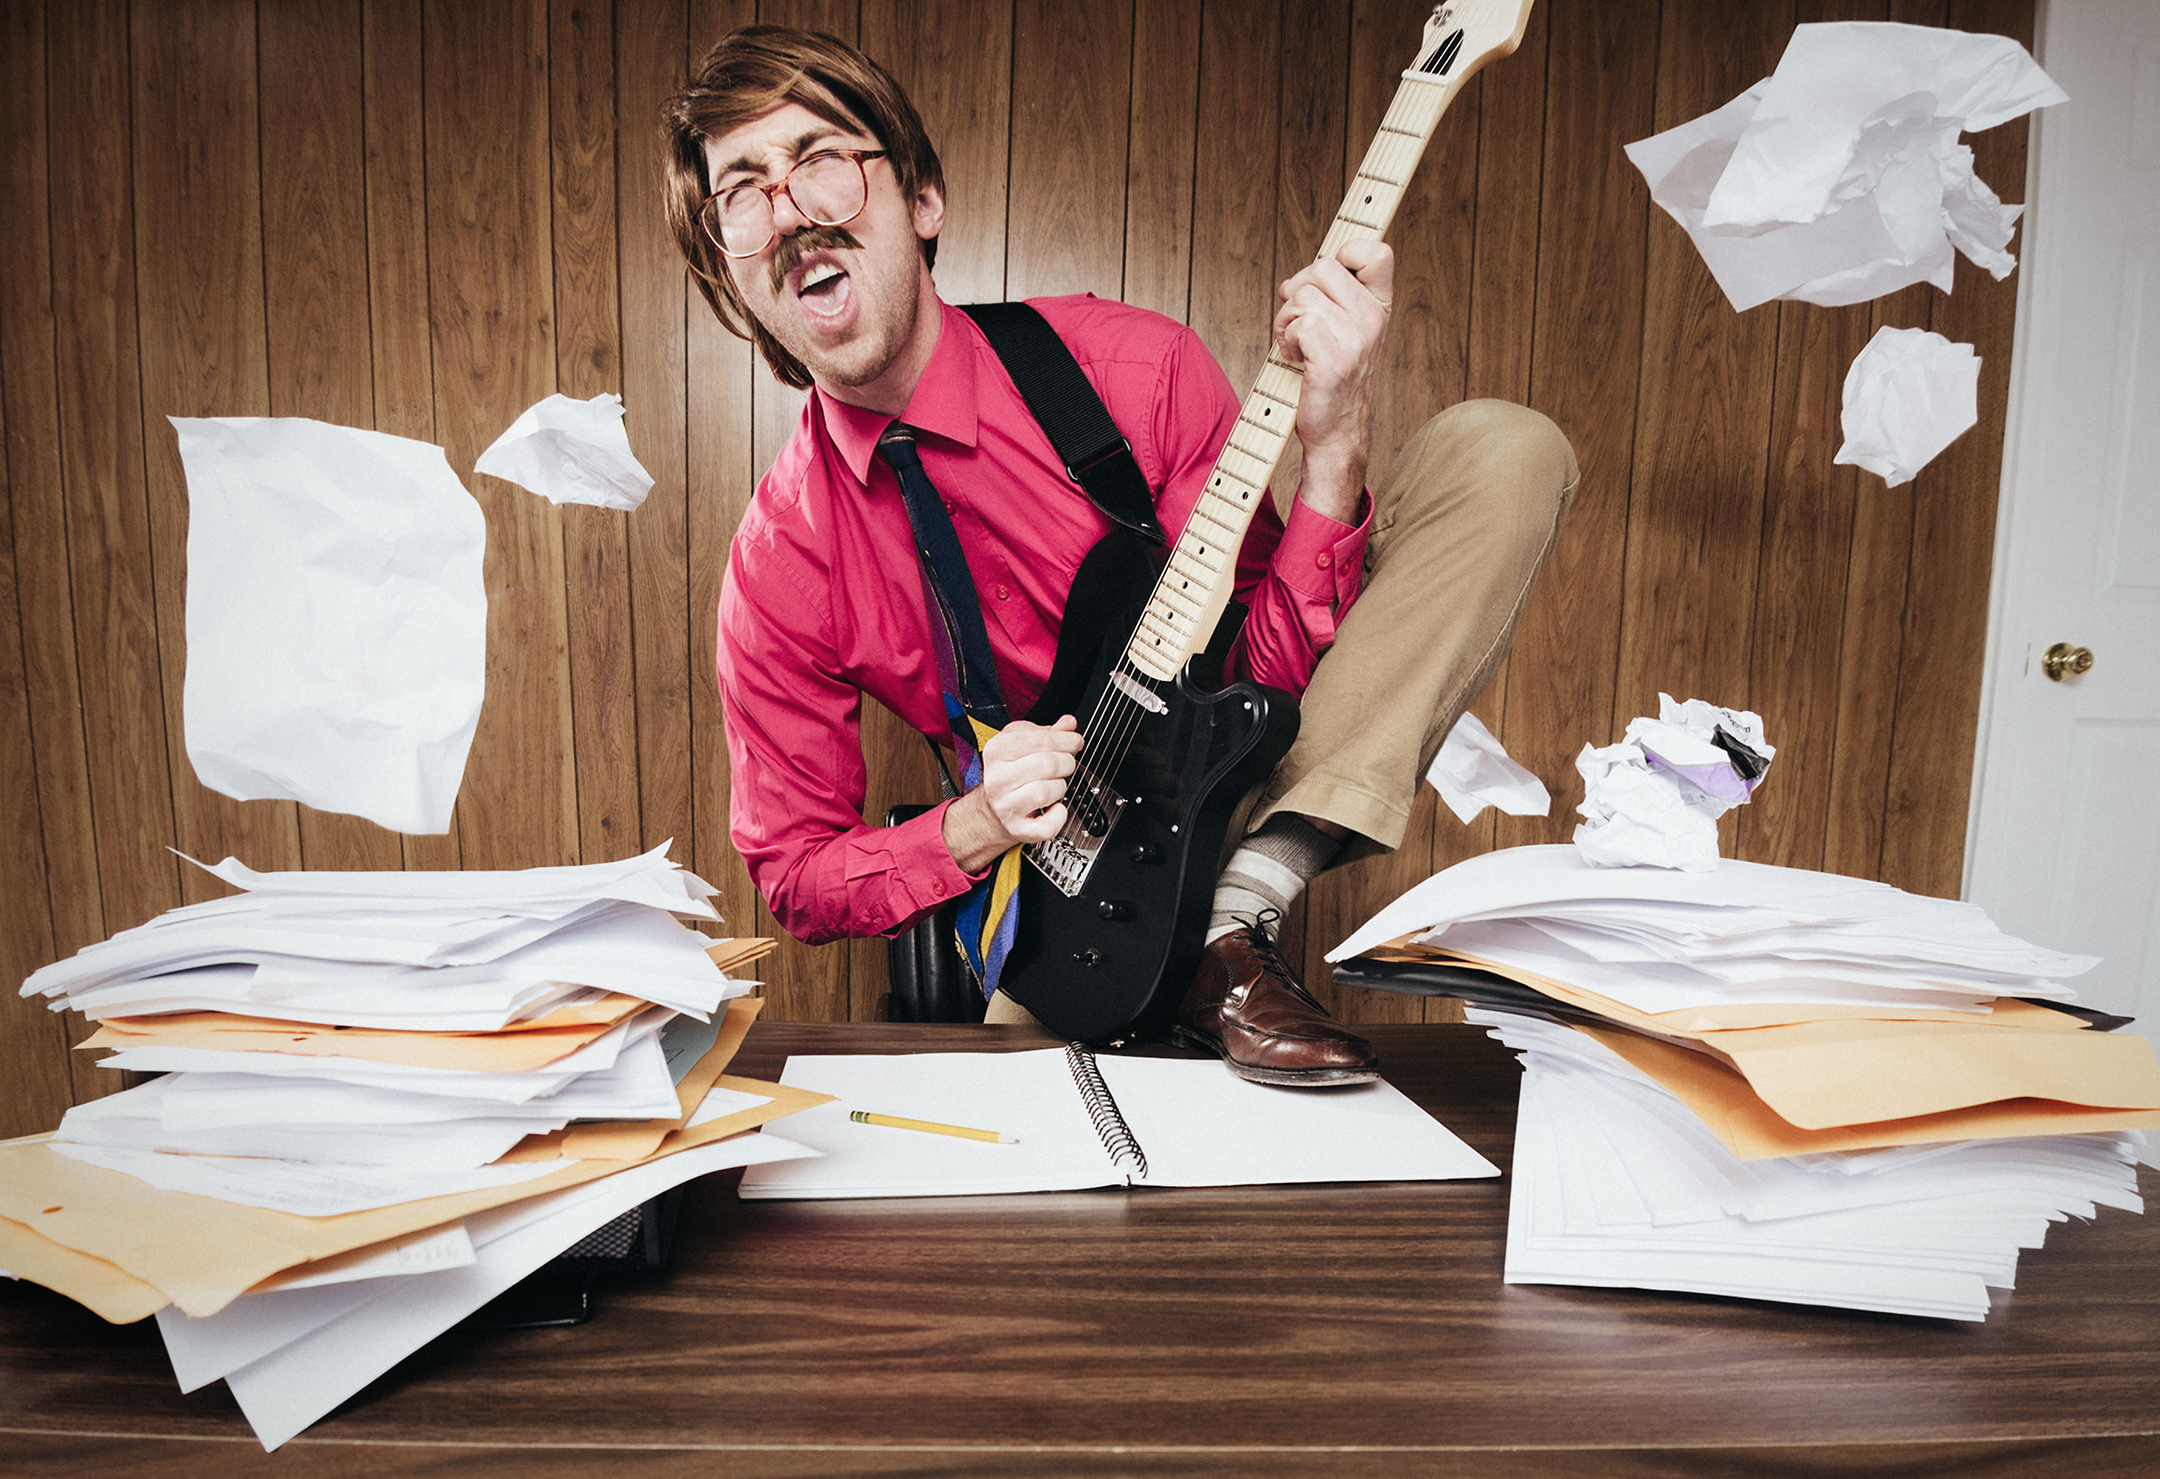 A white collar business man working in a retro 1980's style office stands on his desk piled with paperwork and documents, shredding some rock and roll on his electric guitar.